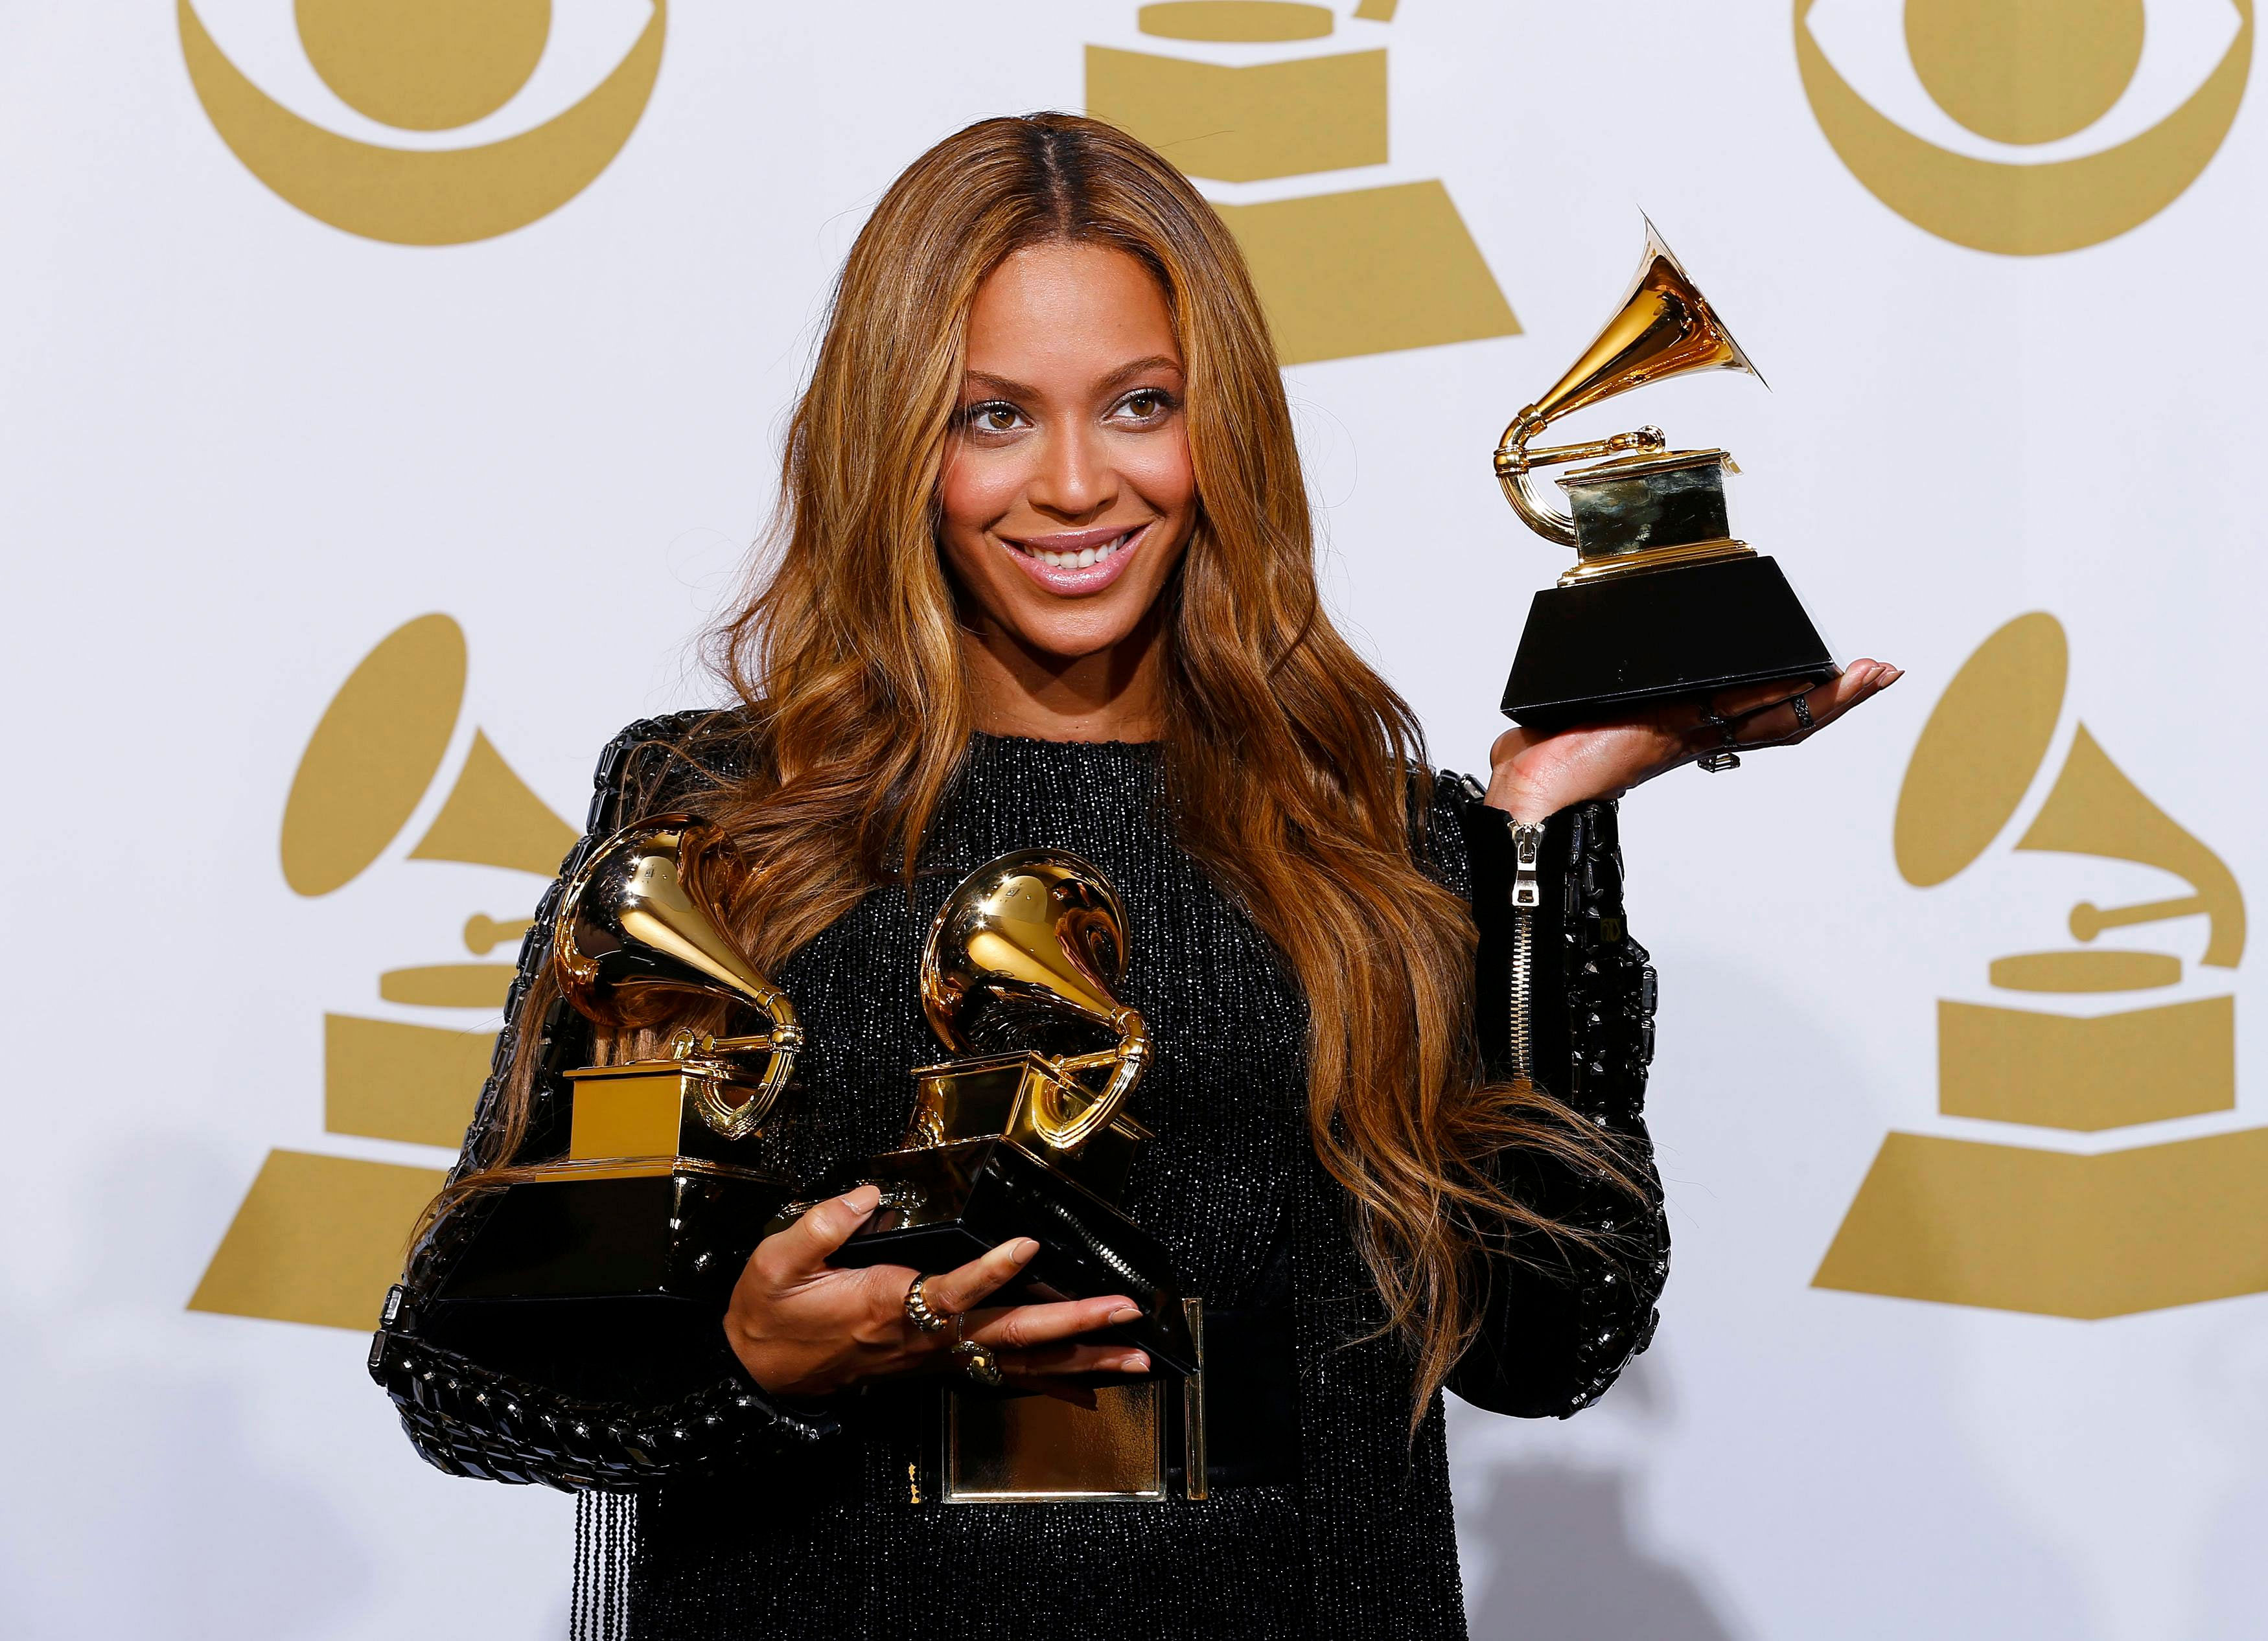 Singer Beyonce Knowles dominated the R&B categories by winning Best R&B Performance and Best R&B Song for "Drunk in love" at the 57th Grammy Awards ceremony held at the Staples Center here Sunday night.Reuters photo